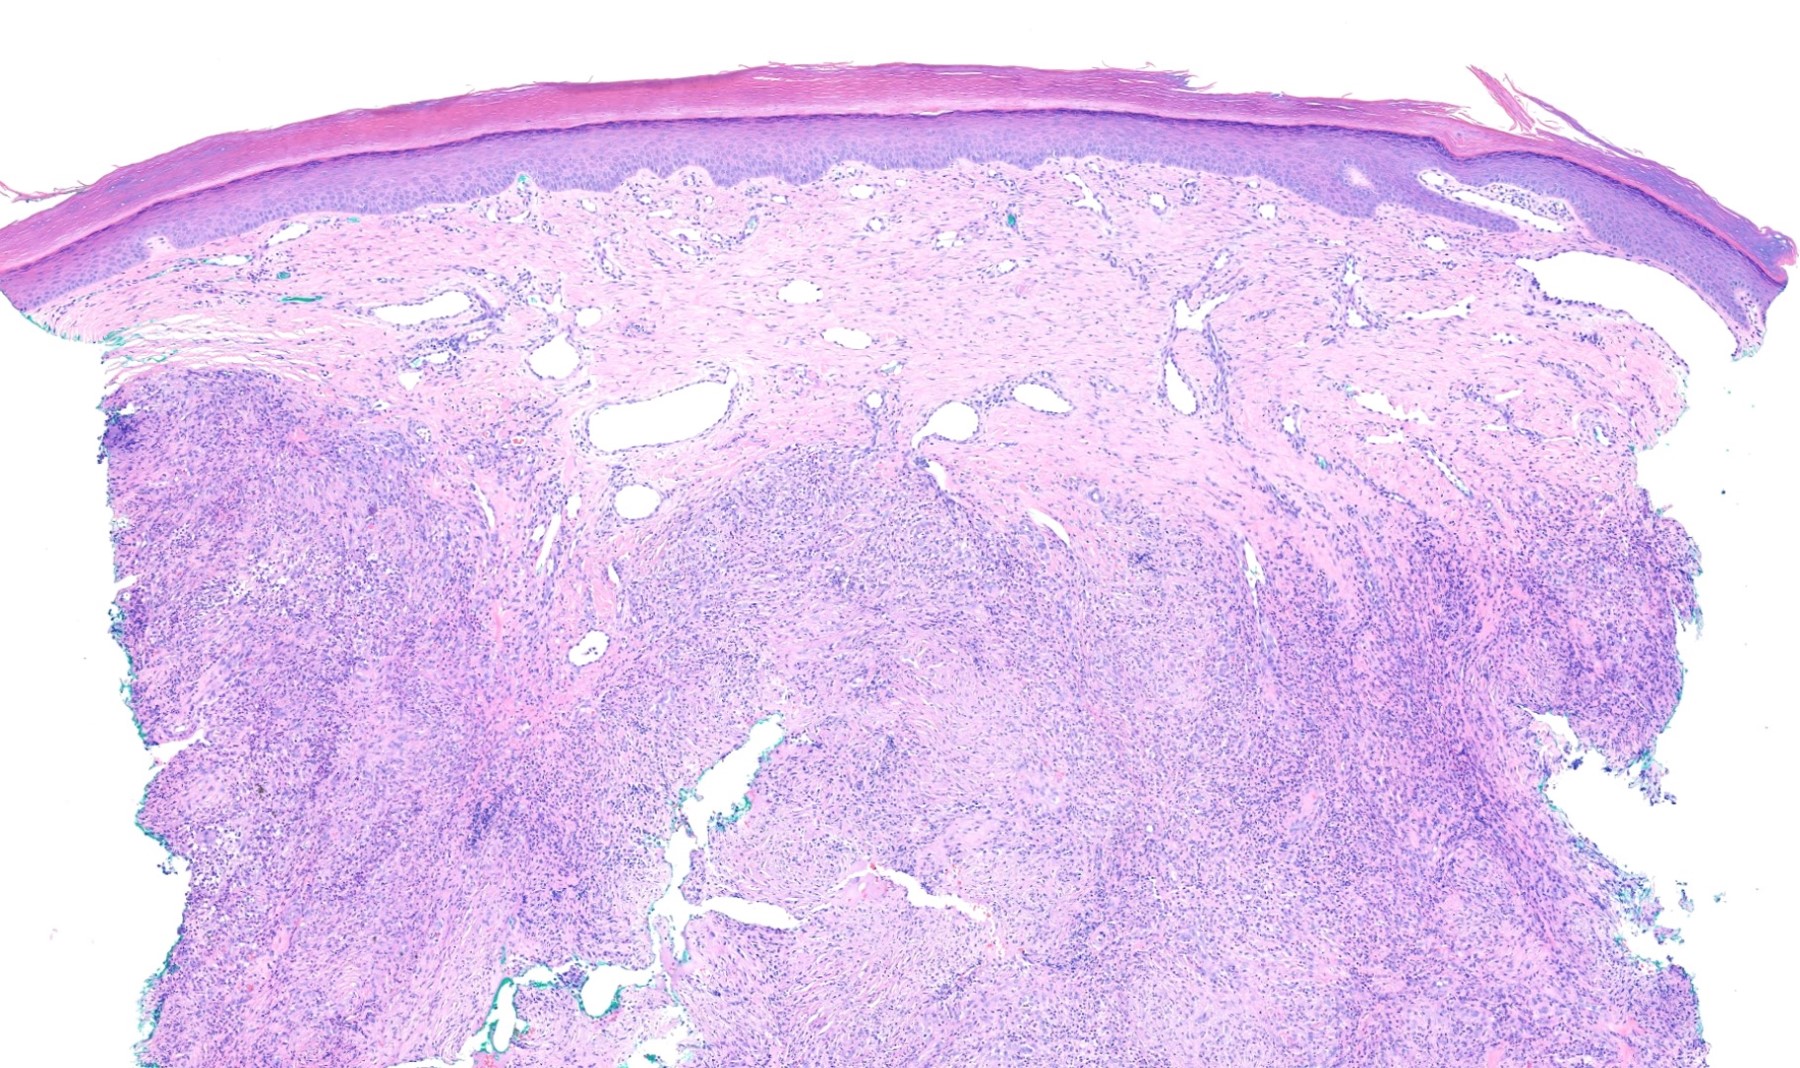 Dilated vessels and prominent fibrosis 